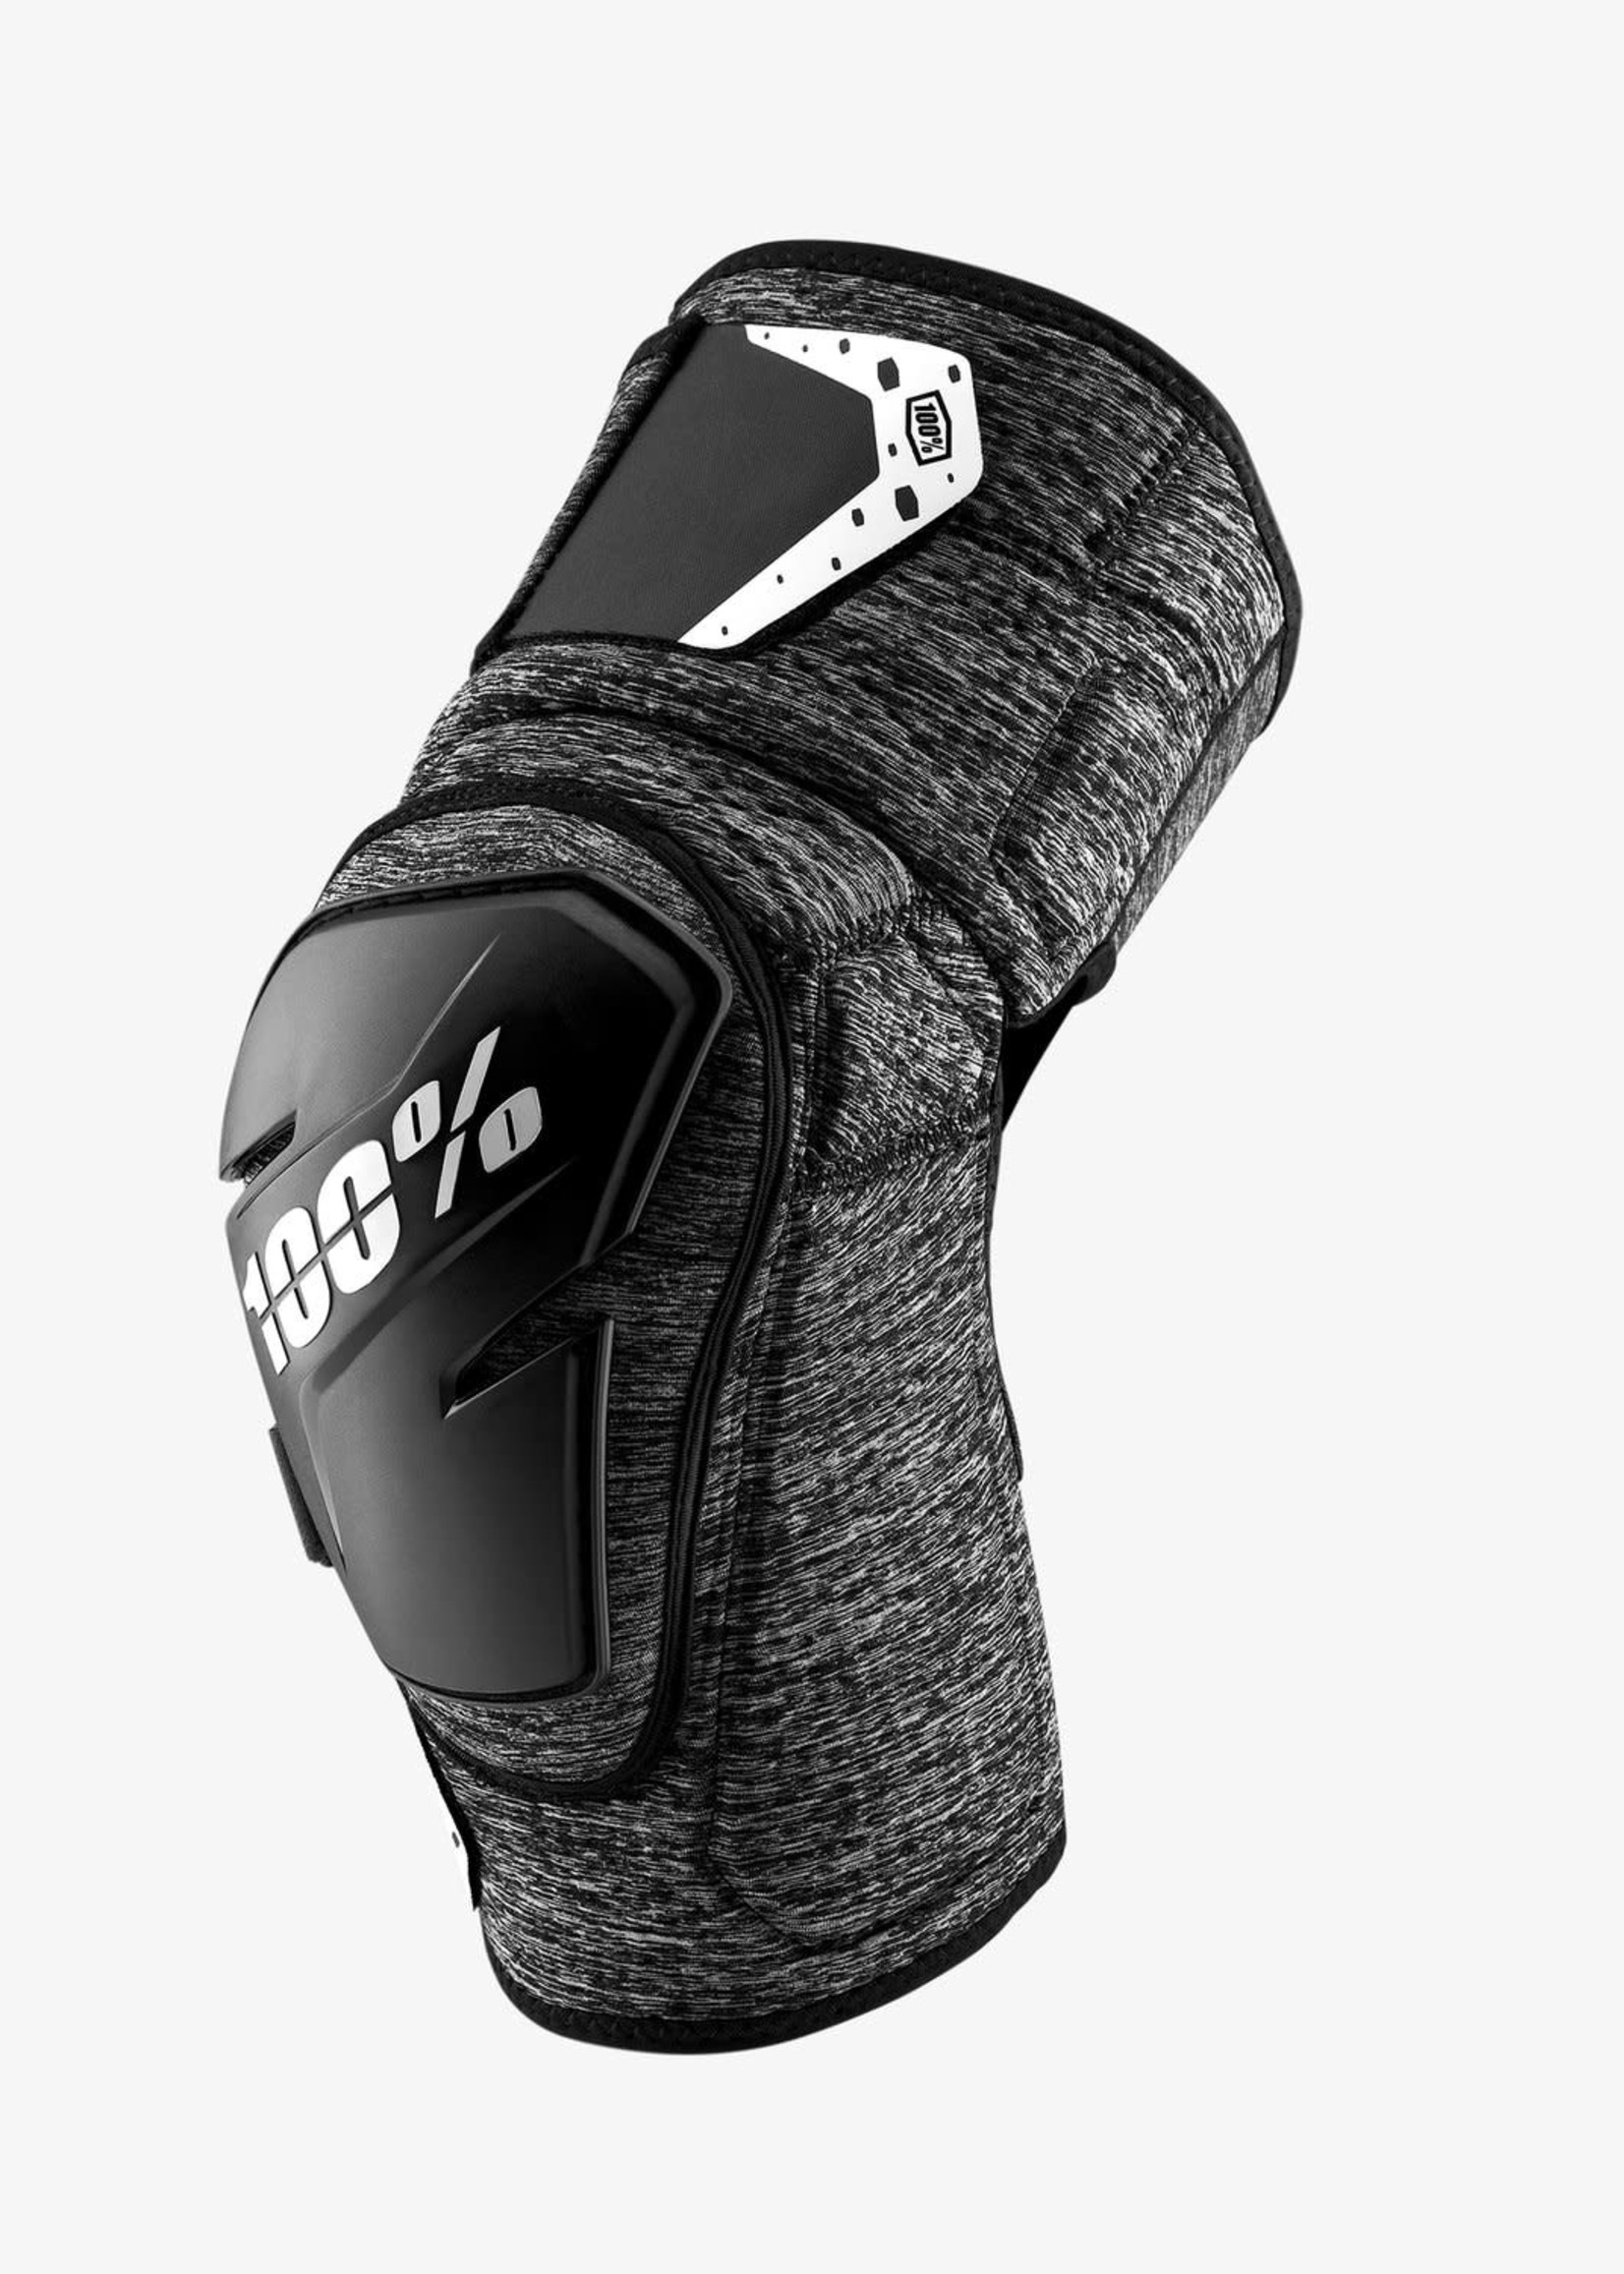 FORTIS KNEE GUARDS